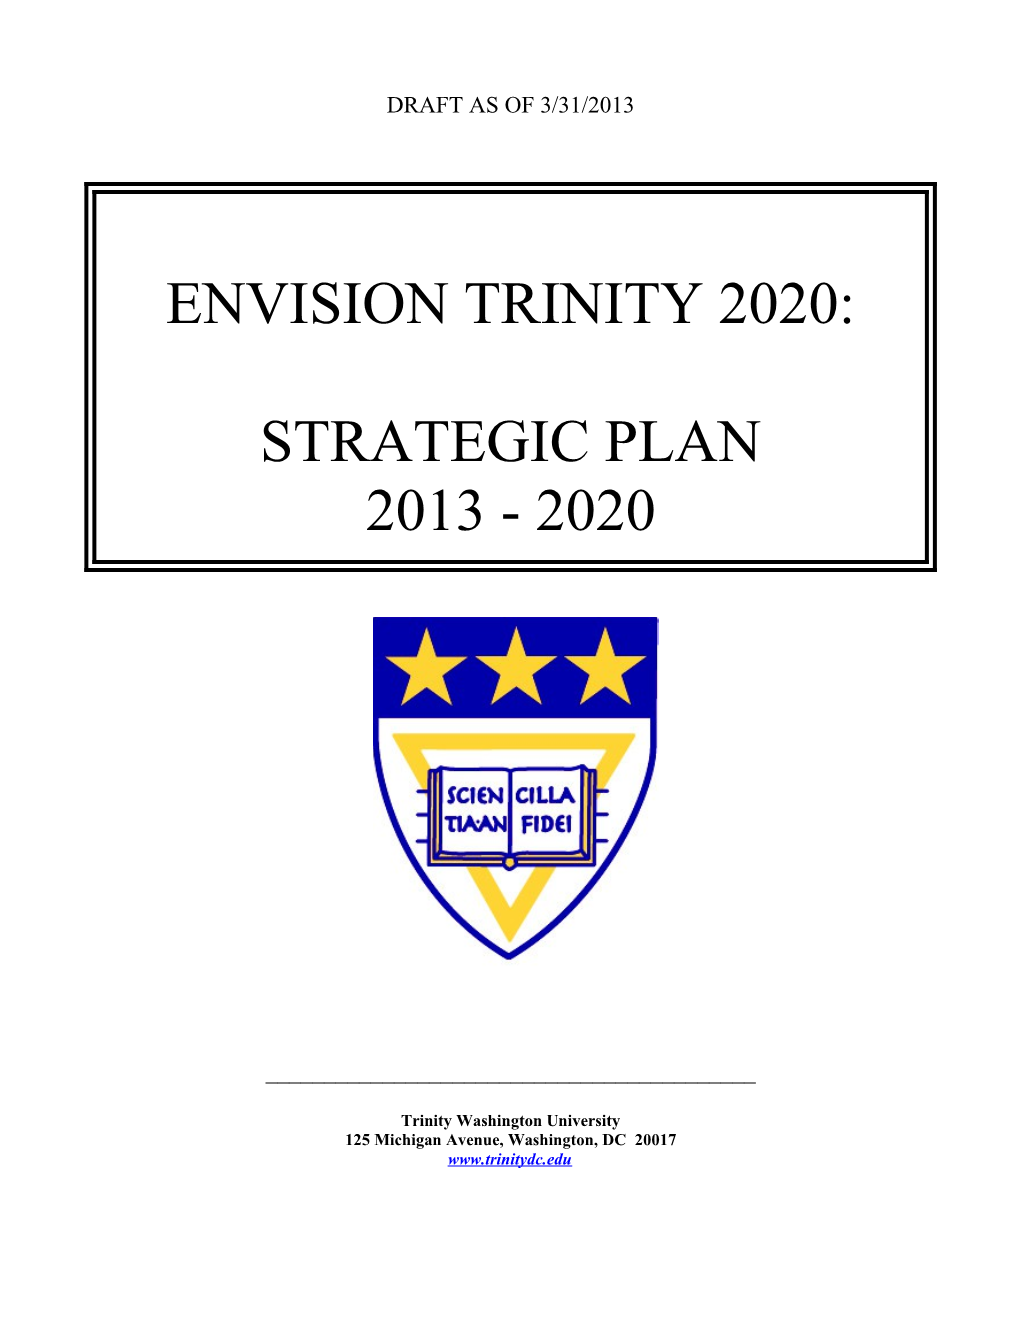 Chapter 9: Achieving Trinity 2010 Strategic Planning